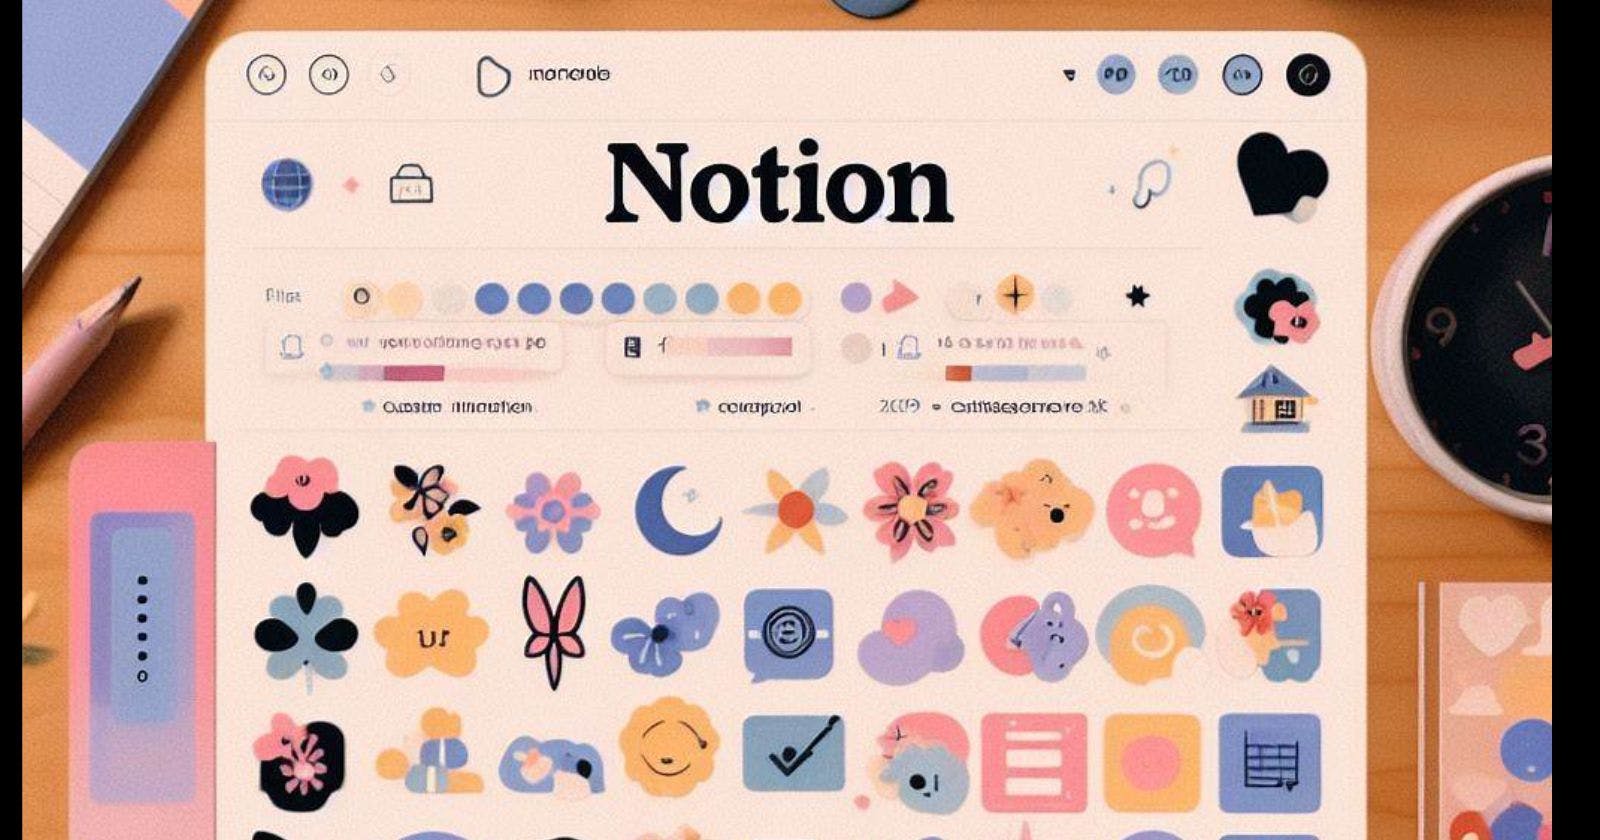 How to Make Notion Aesthetic